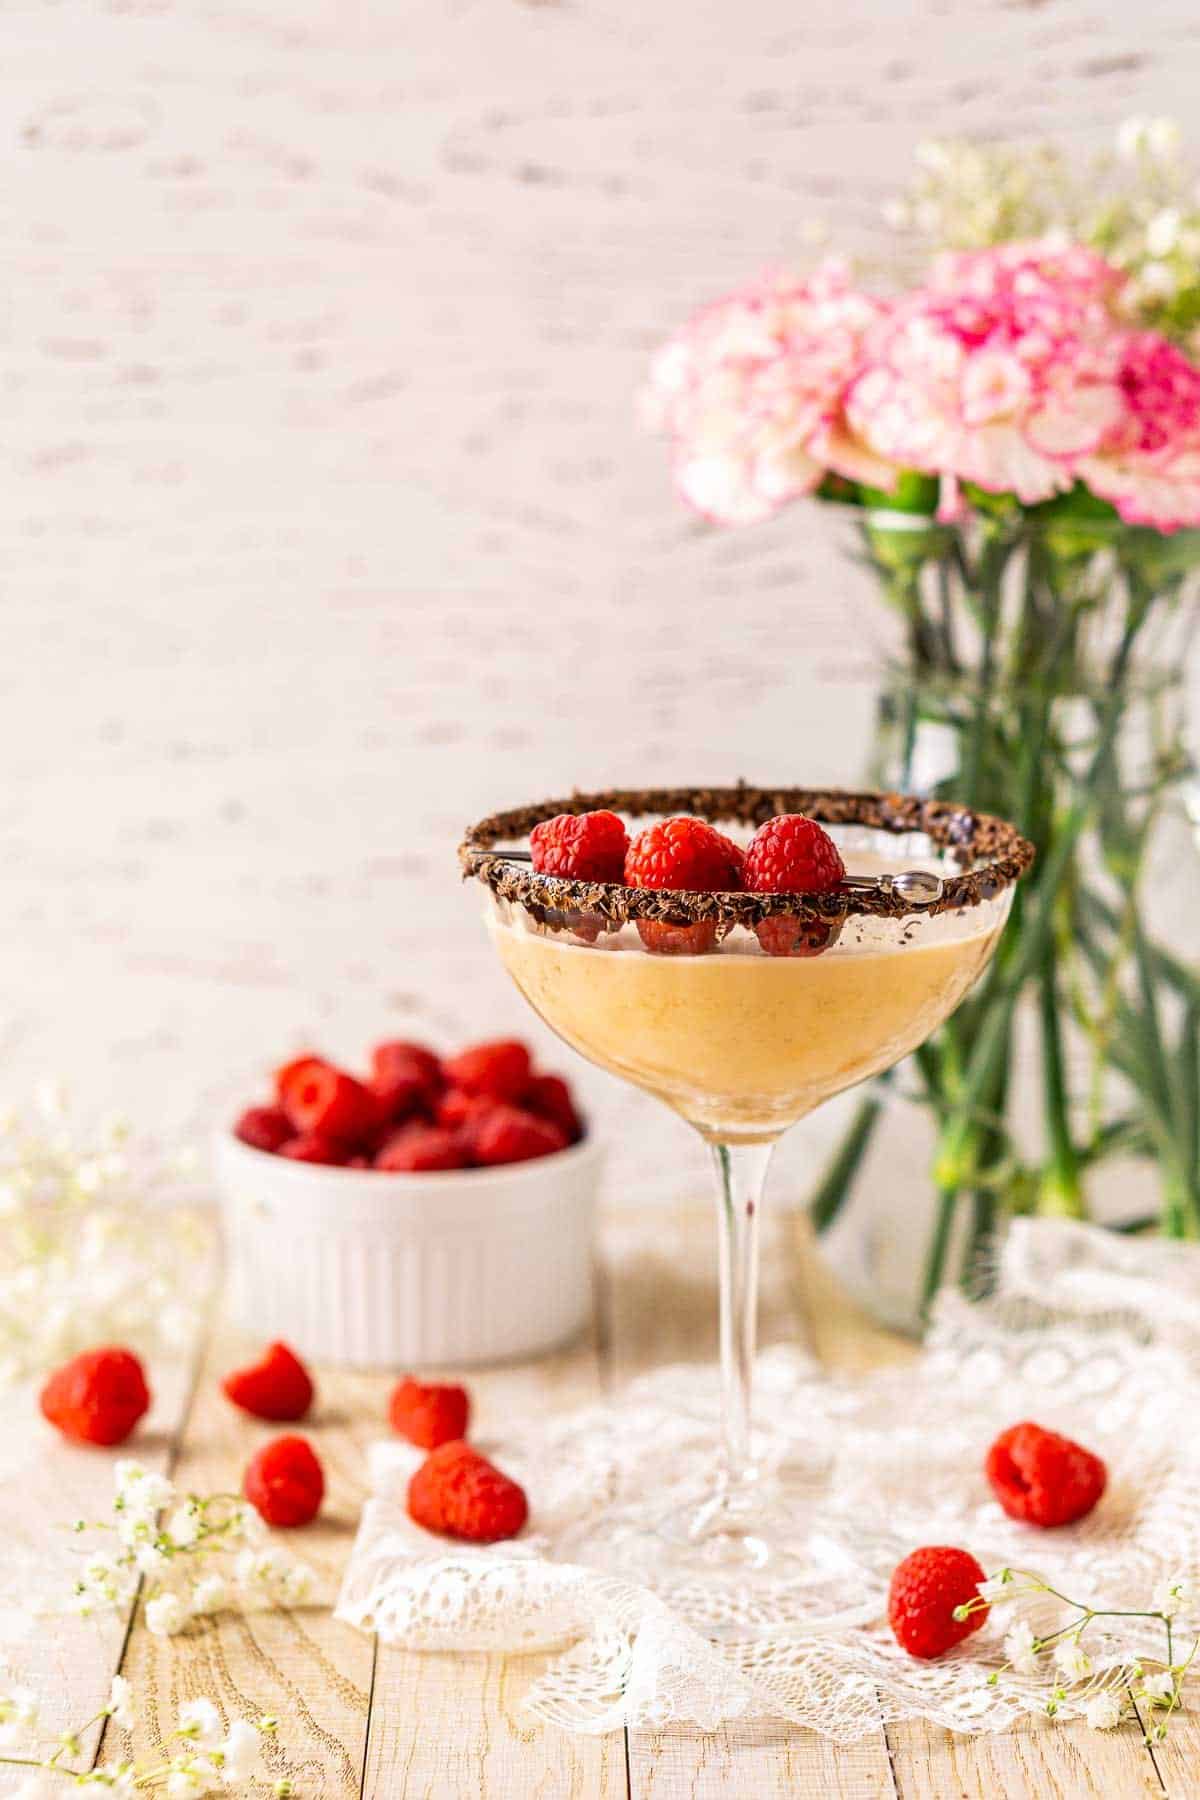 A straight-on shot of the chocolate-raspberry martini on white lace with raspberries and white flowers scattered around it.